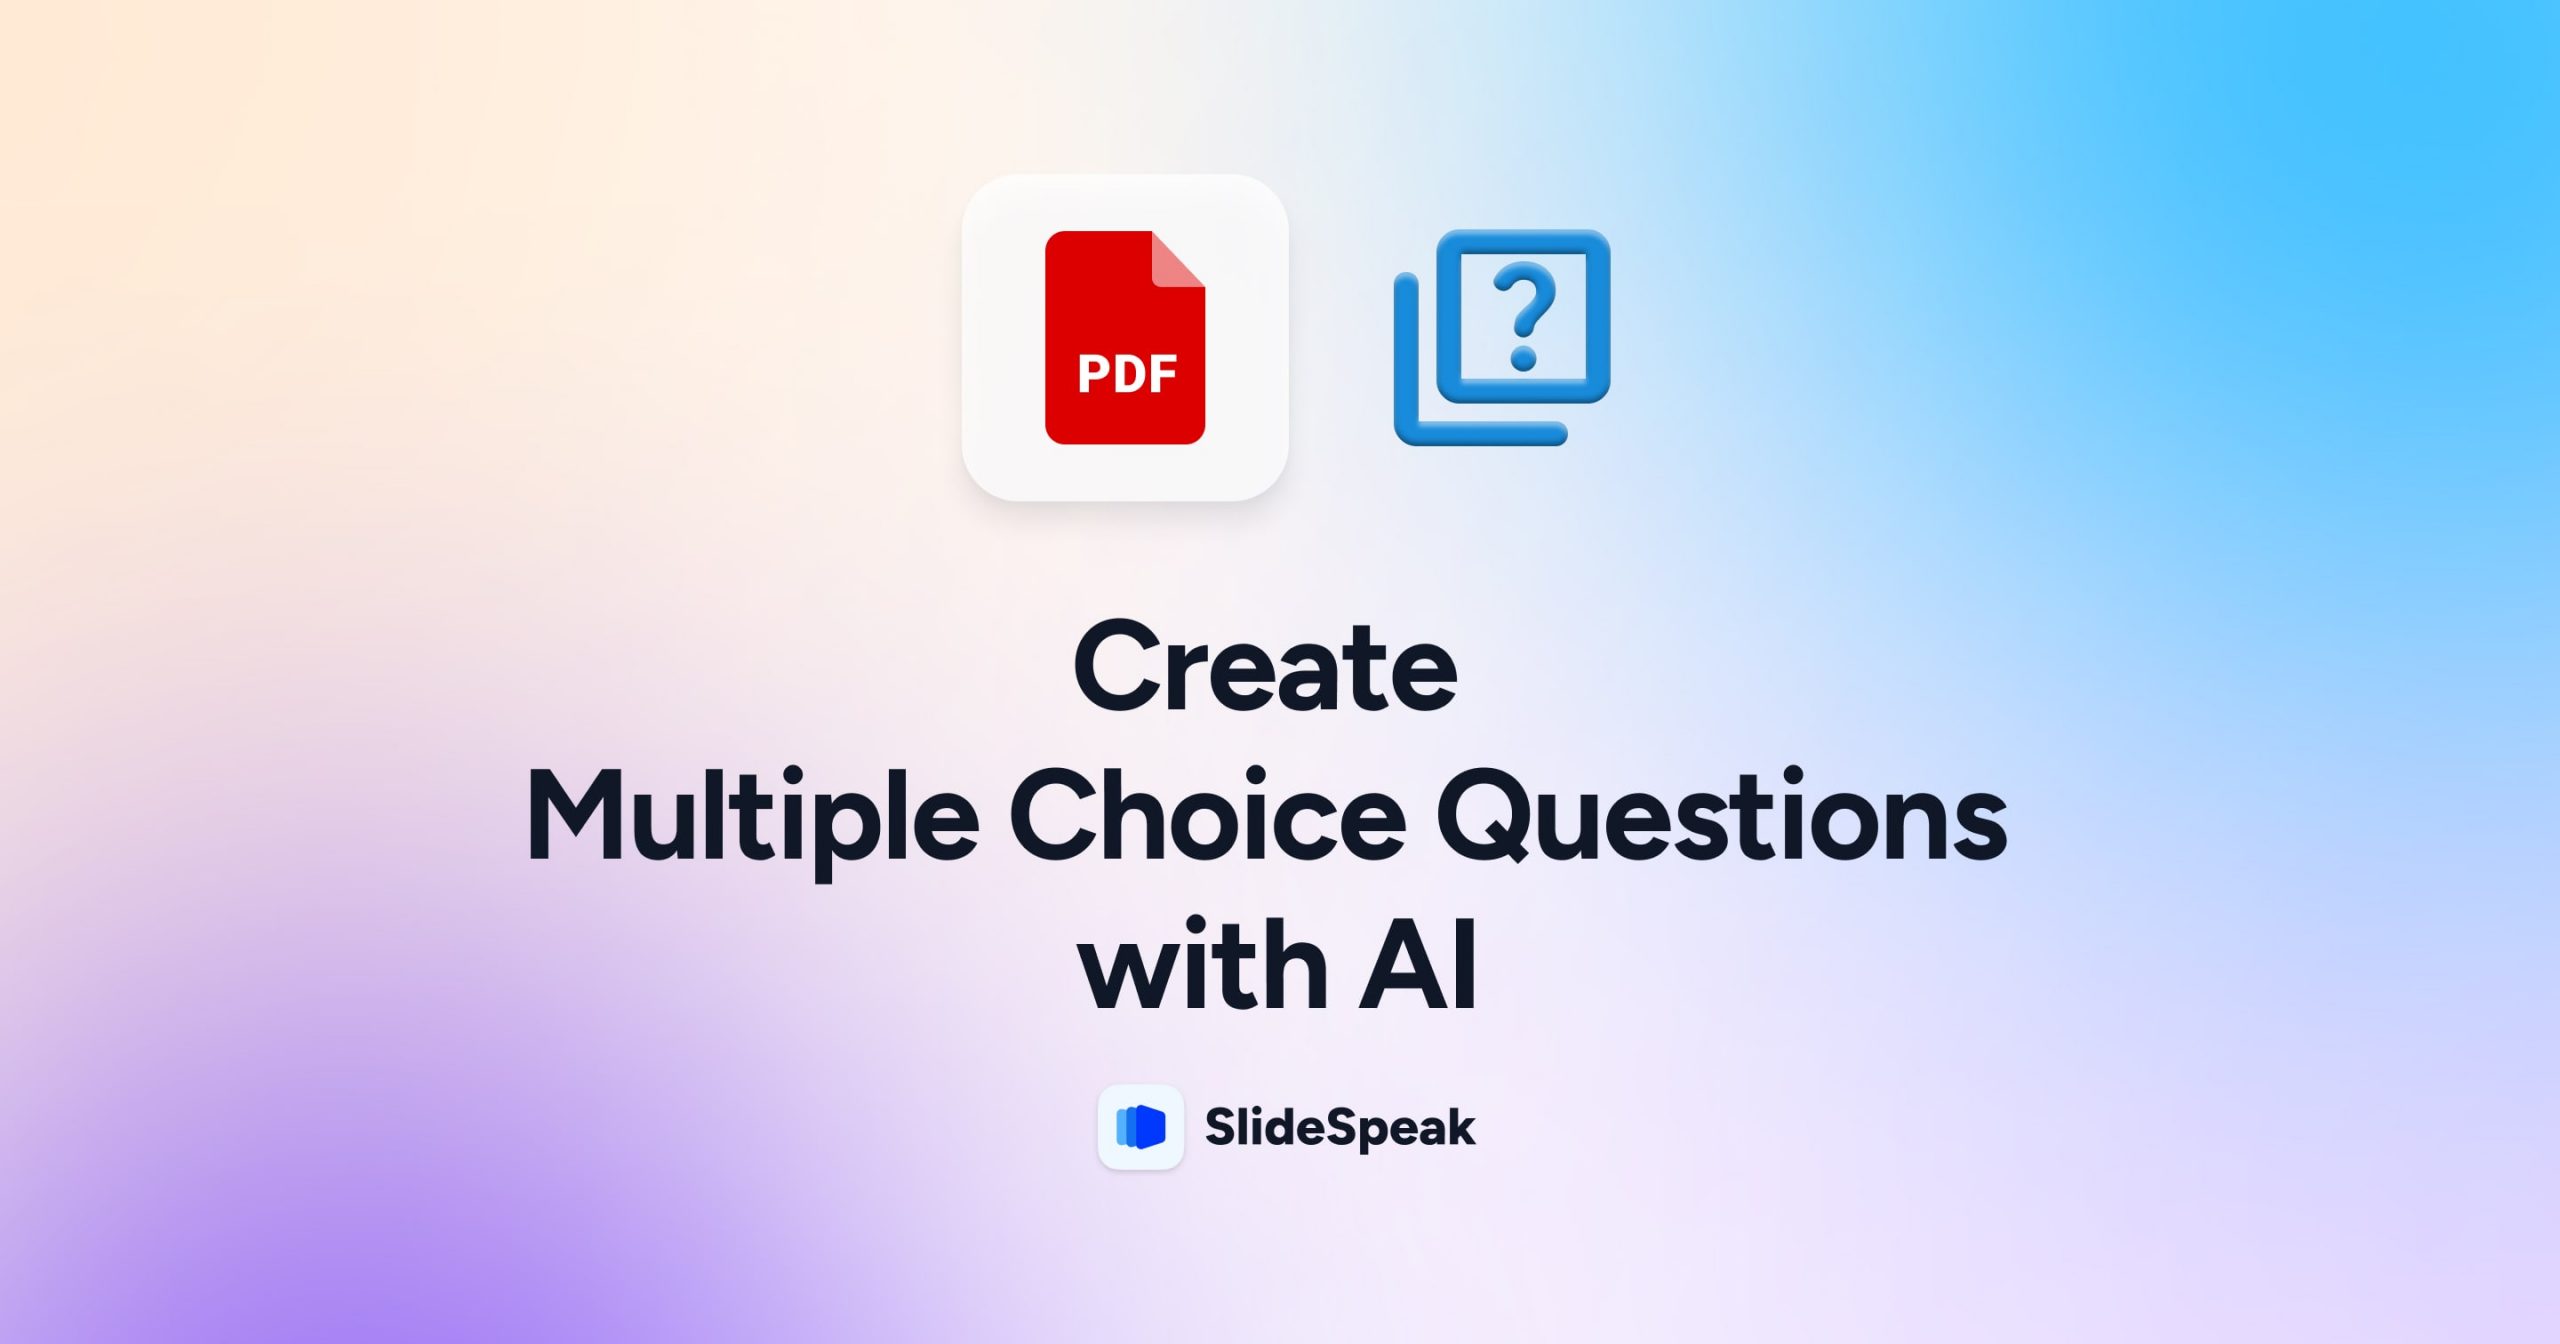 How to Generate Multiple-Choice Questions from a PDF with AI